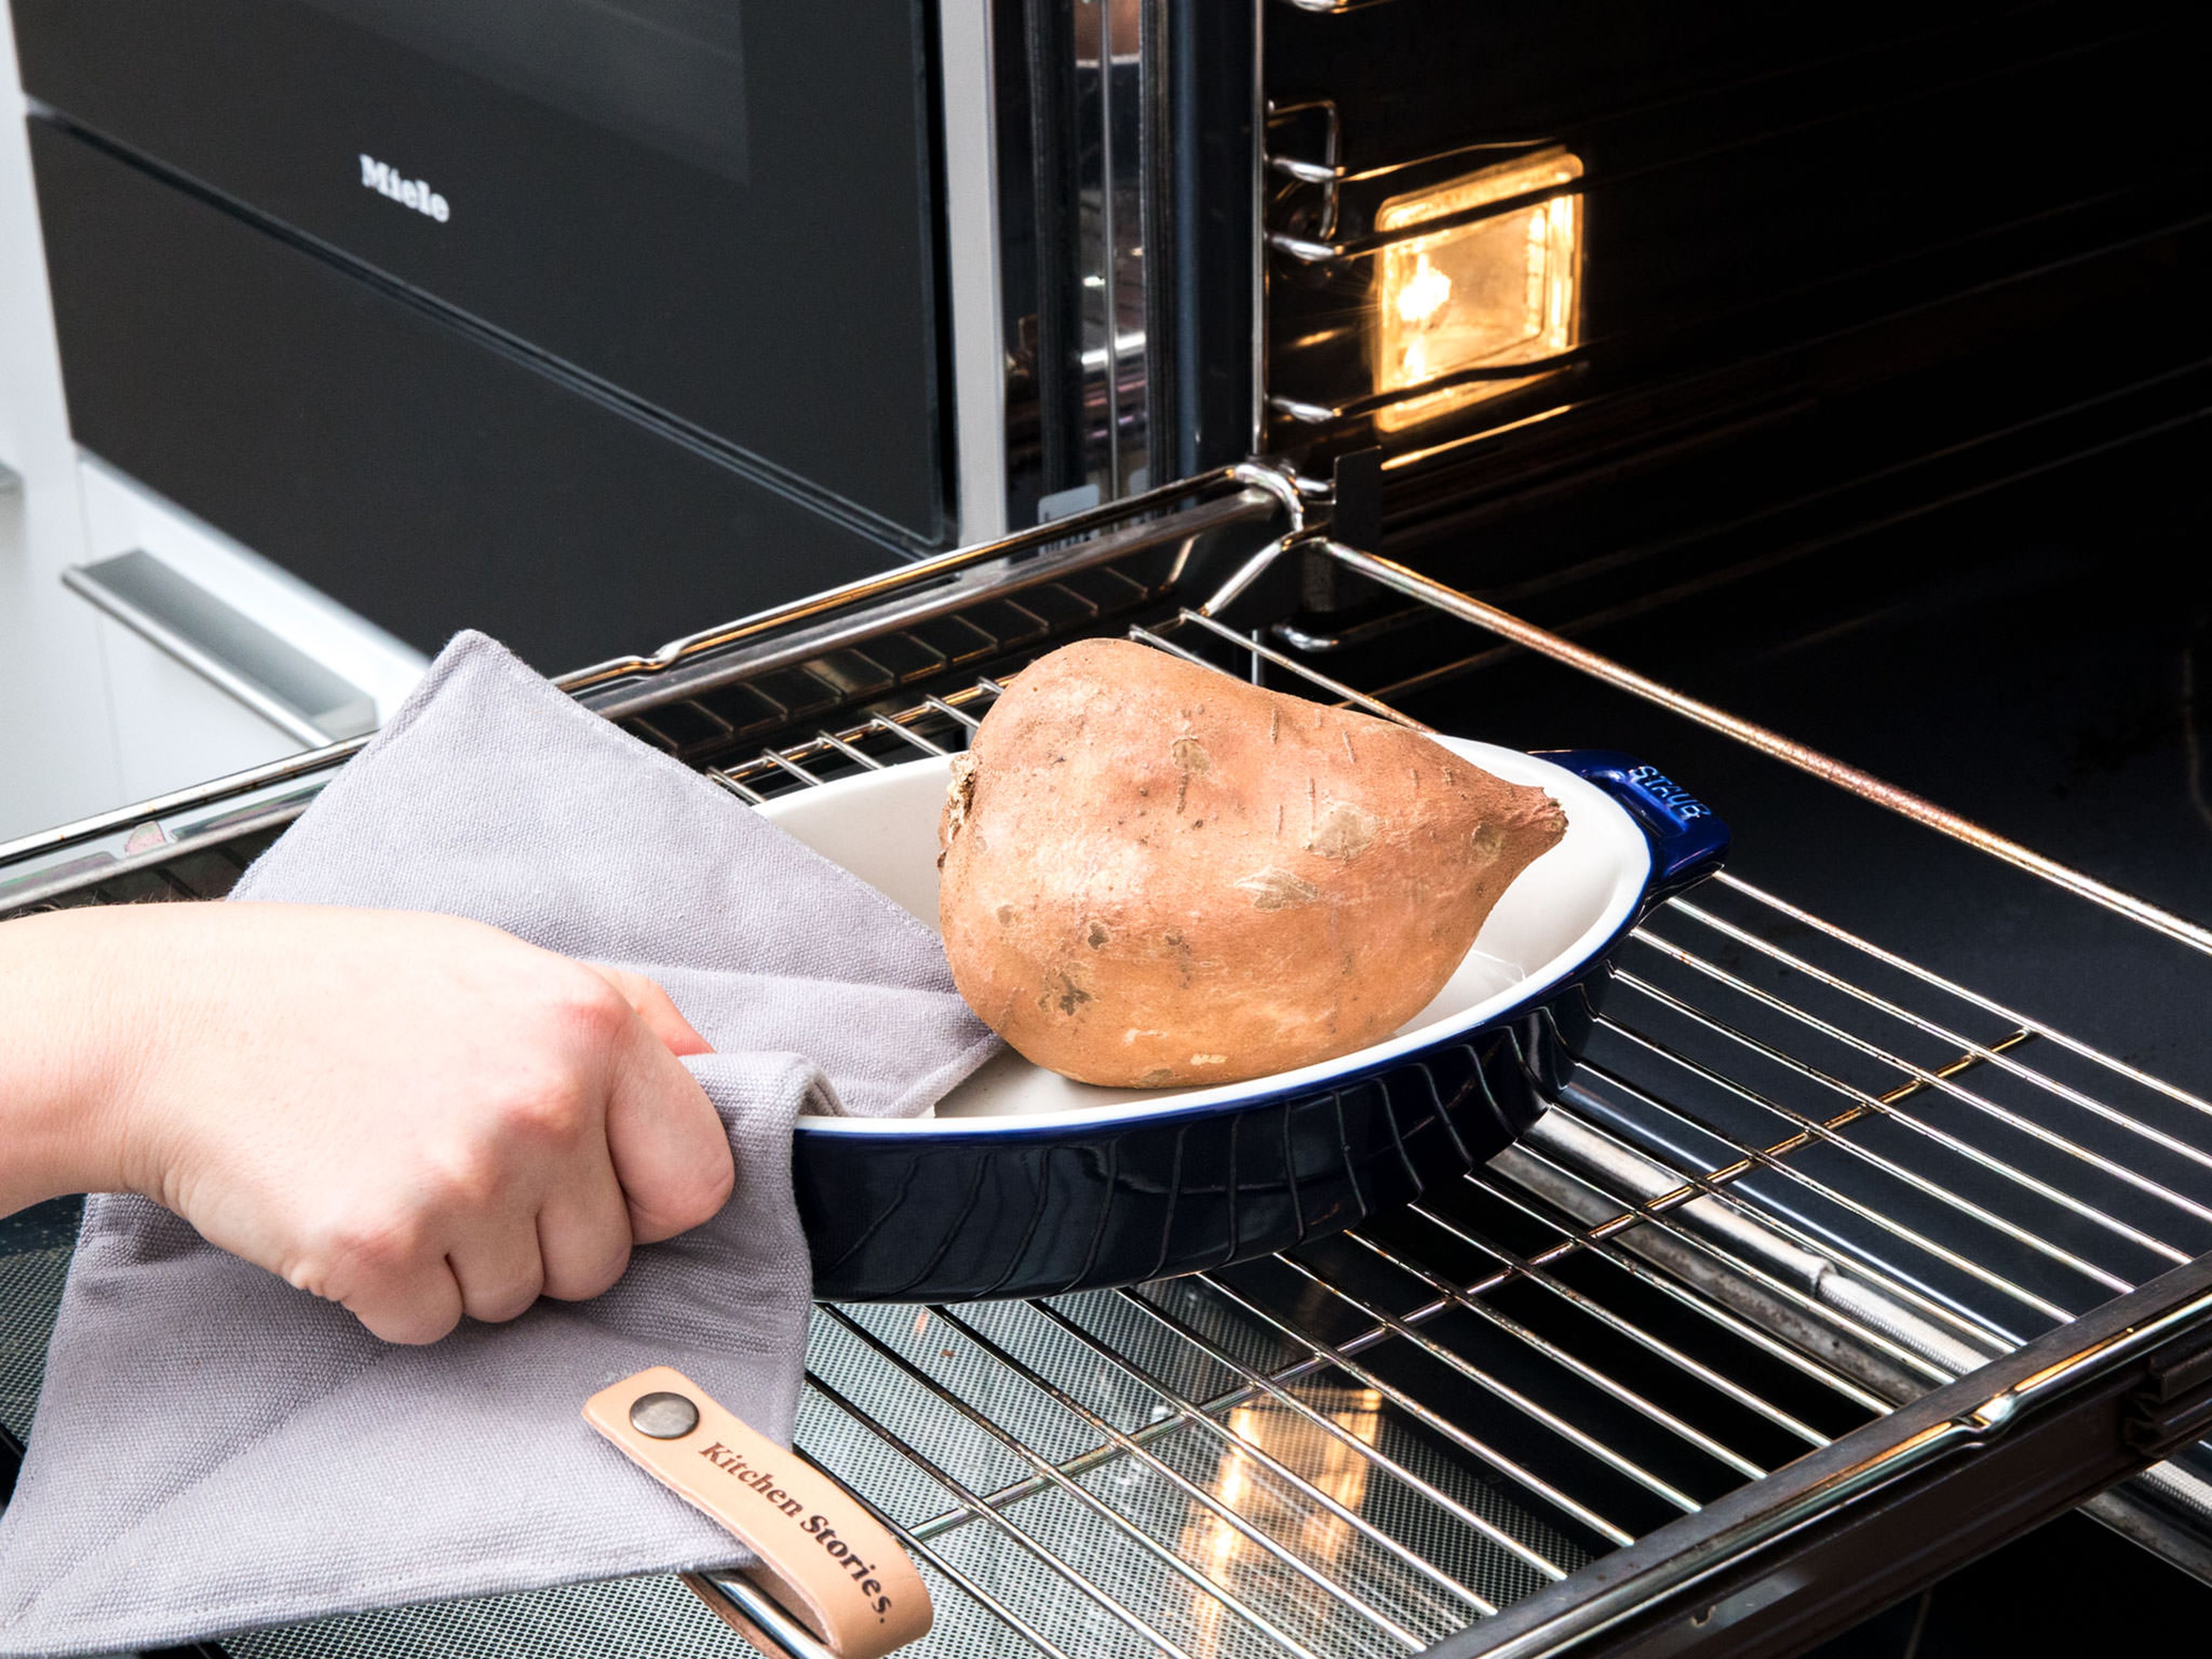 Preheat the oven to 175°C/345°F. Line the springform pan with parchment paper. Place the sweet potato, with the skin still on, in a baking dish and bake for approx. 1 hr.